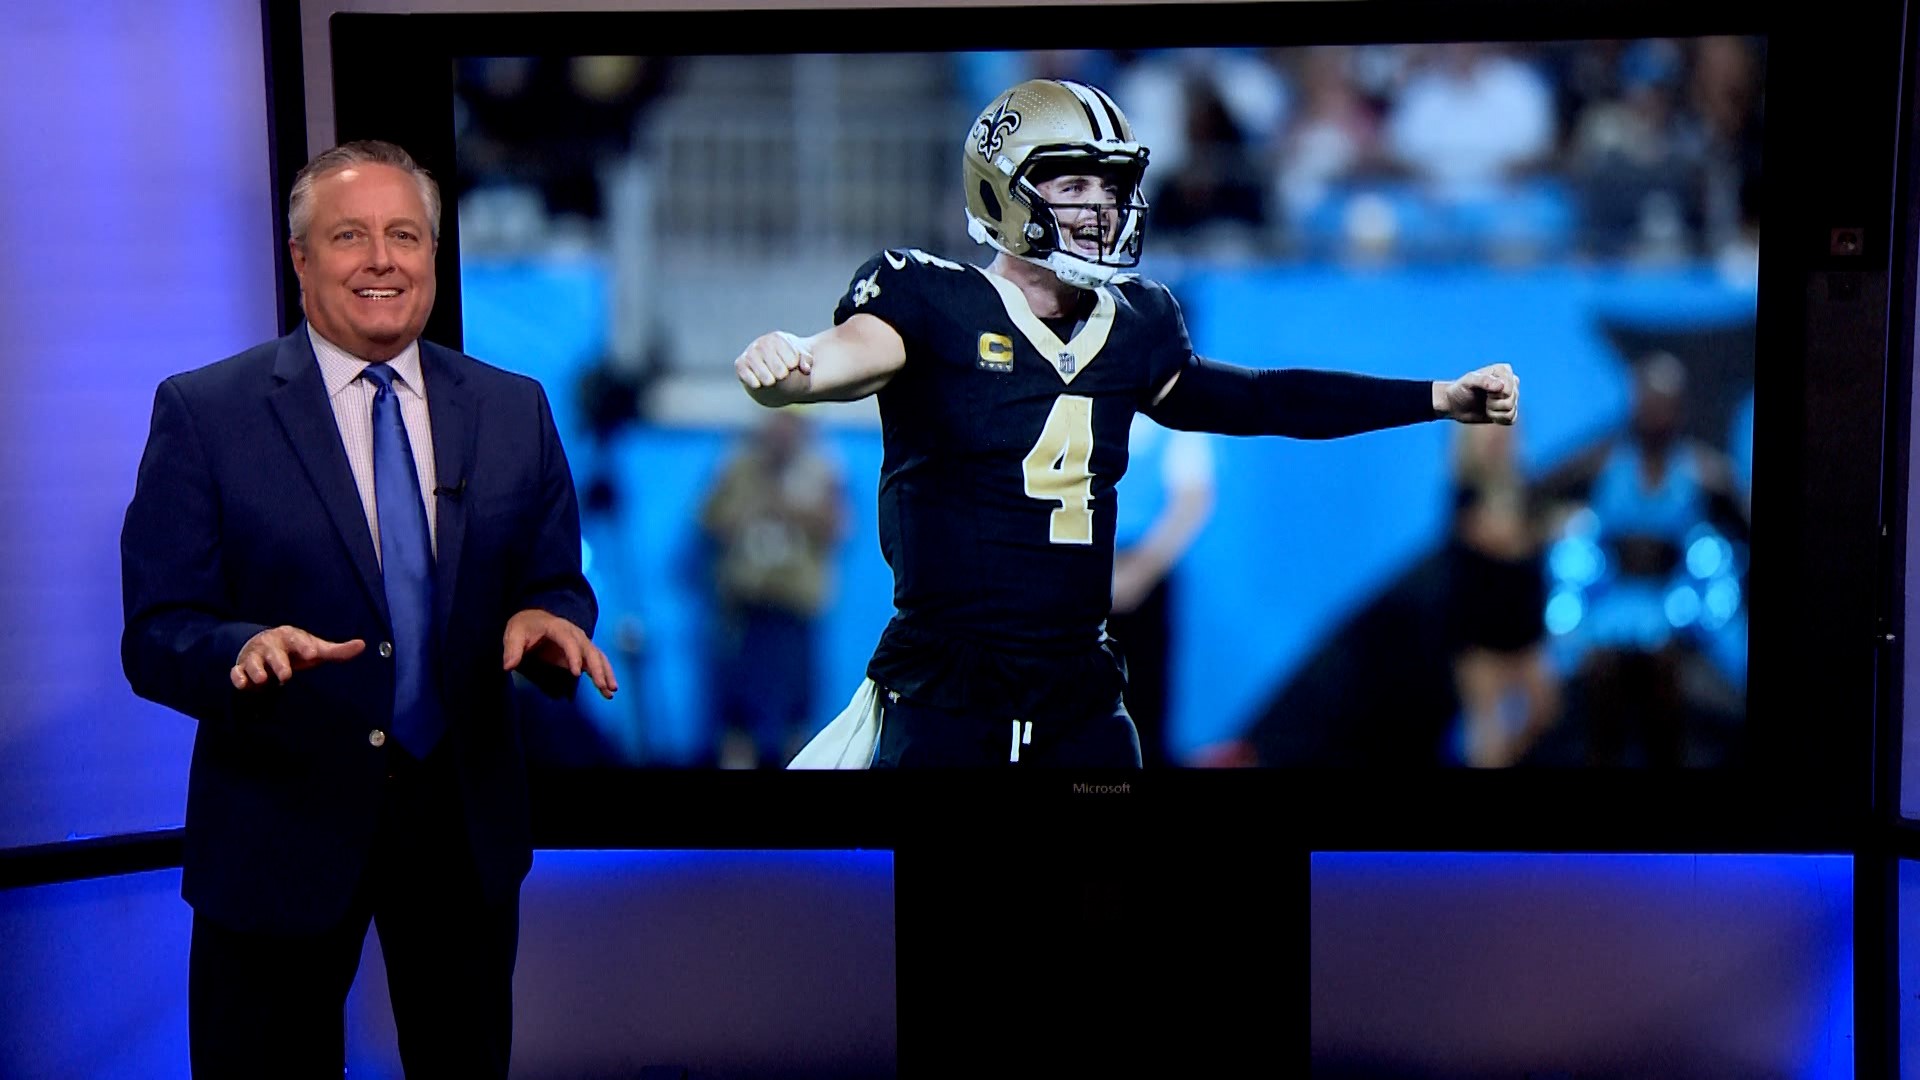 WWL-TV sports director Doug Mouton shares his four takeaways from the Saints' Monday night win in Charlotte, N.C.